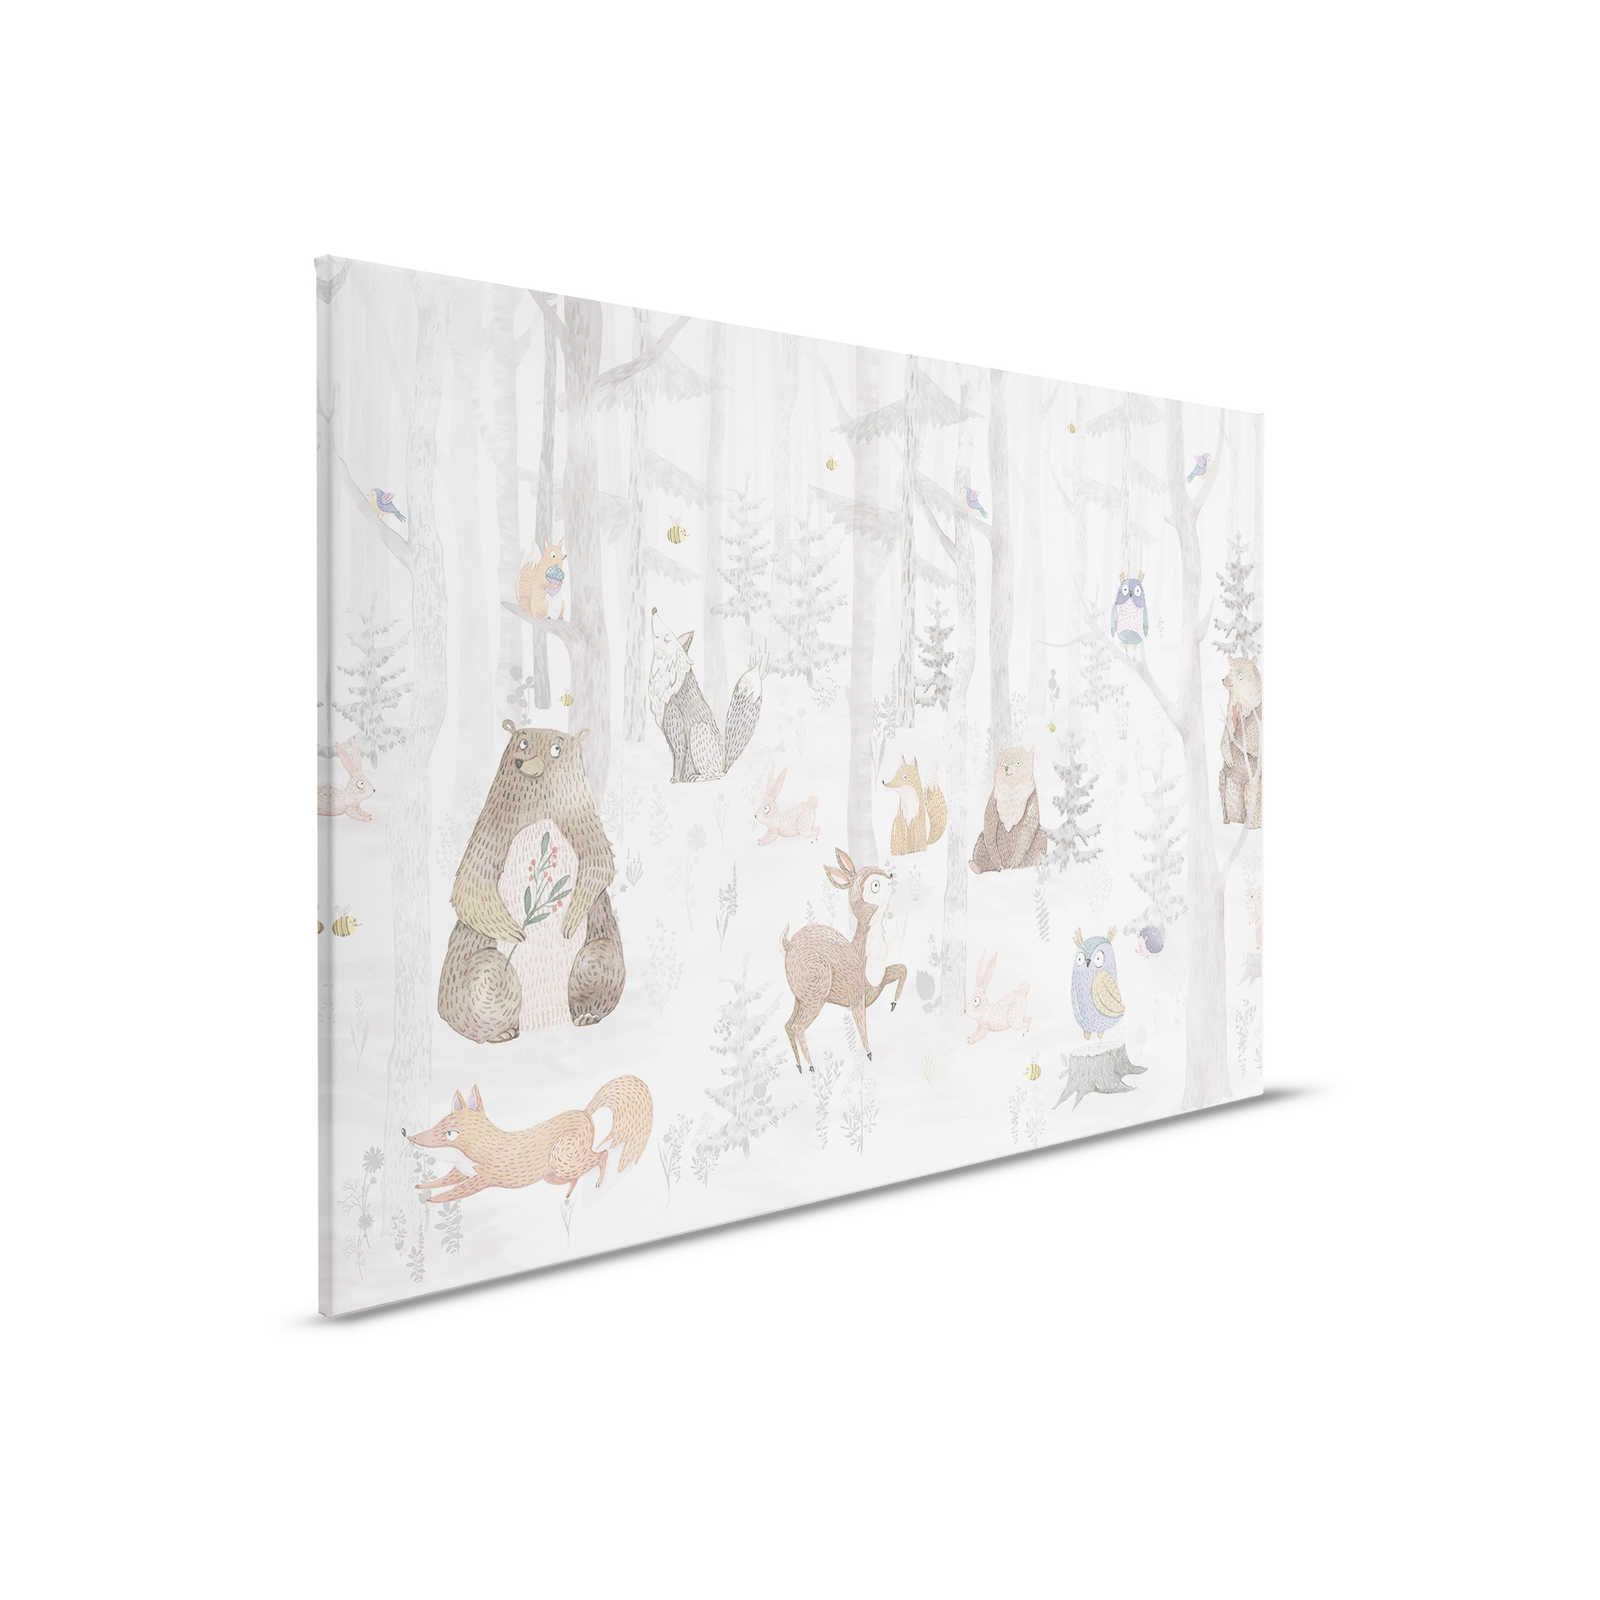         Canvas Enchanted Forest with Animals - 90 cm x 60 cm
    